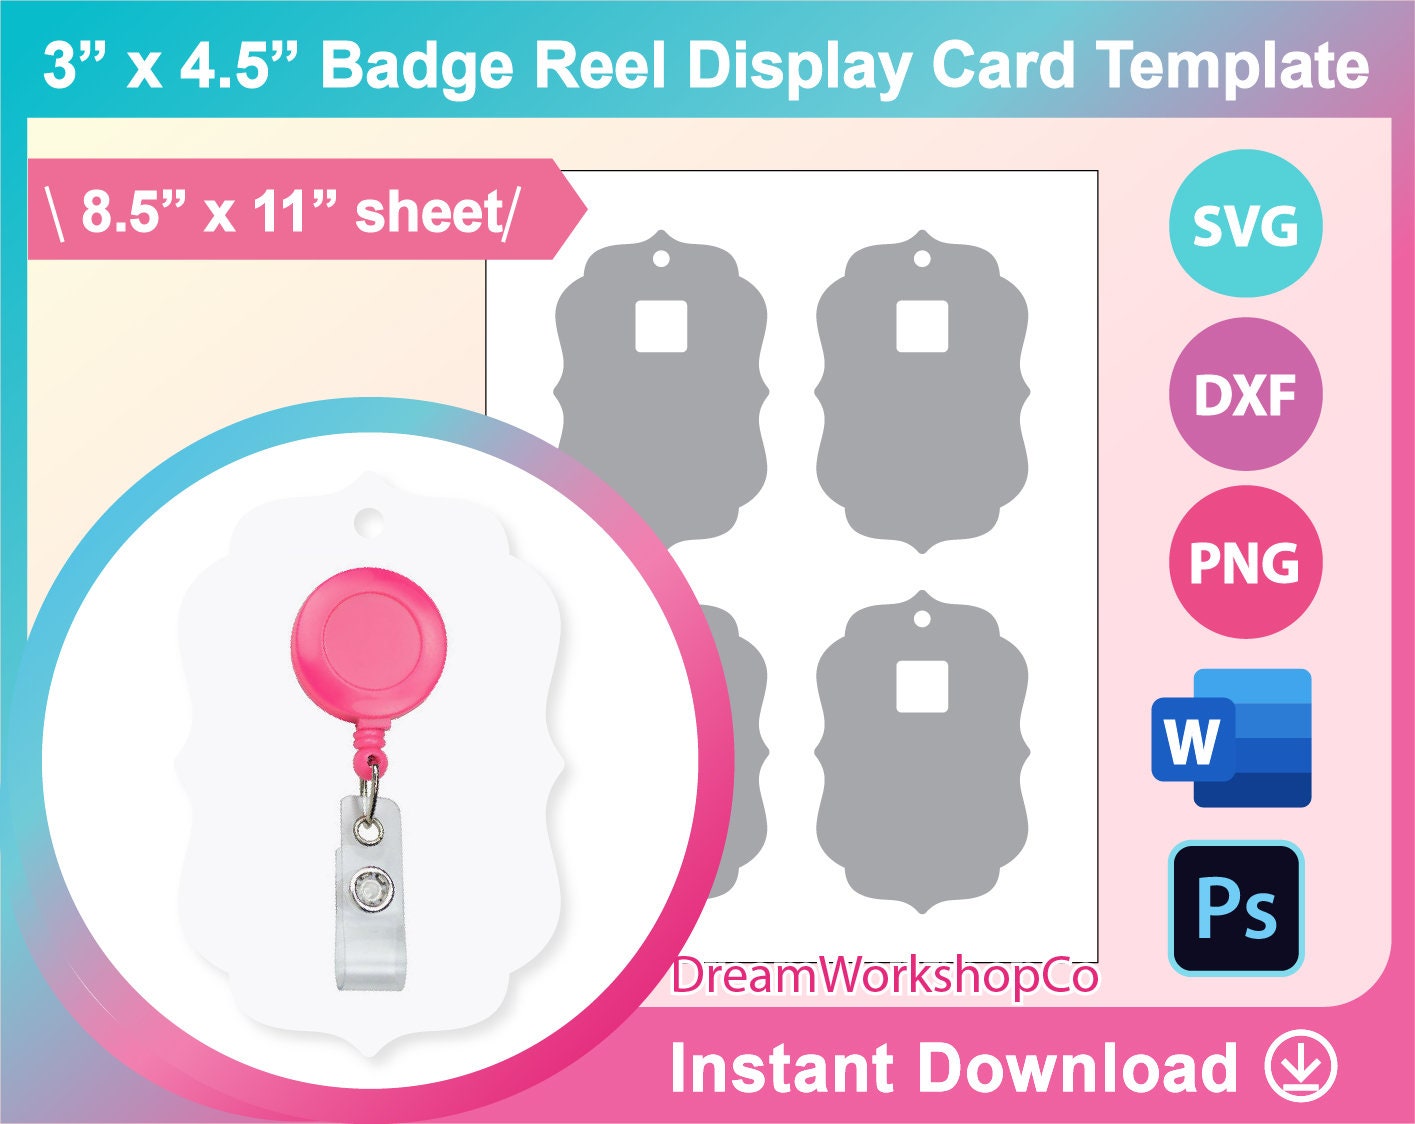 3x4.5 Scalloped Badge Reel Display Card, Badge Reel Card Template, SVG,  DXF, Ms Word Docx, Png, Psd, 8.5x11 Sheet, Printable 